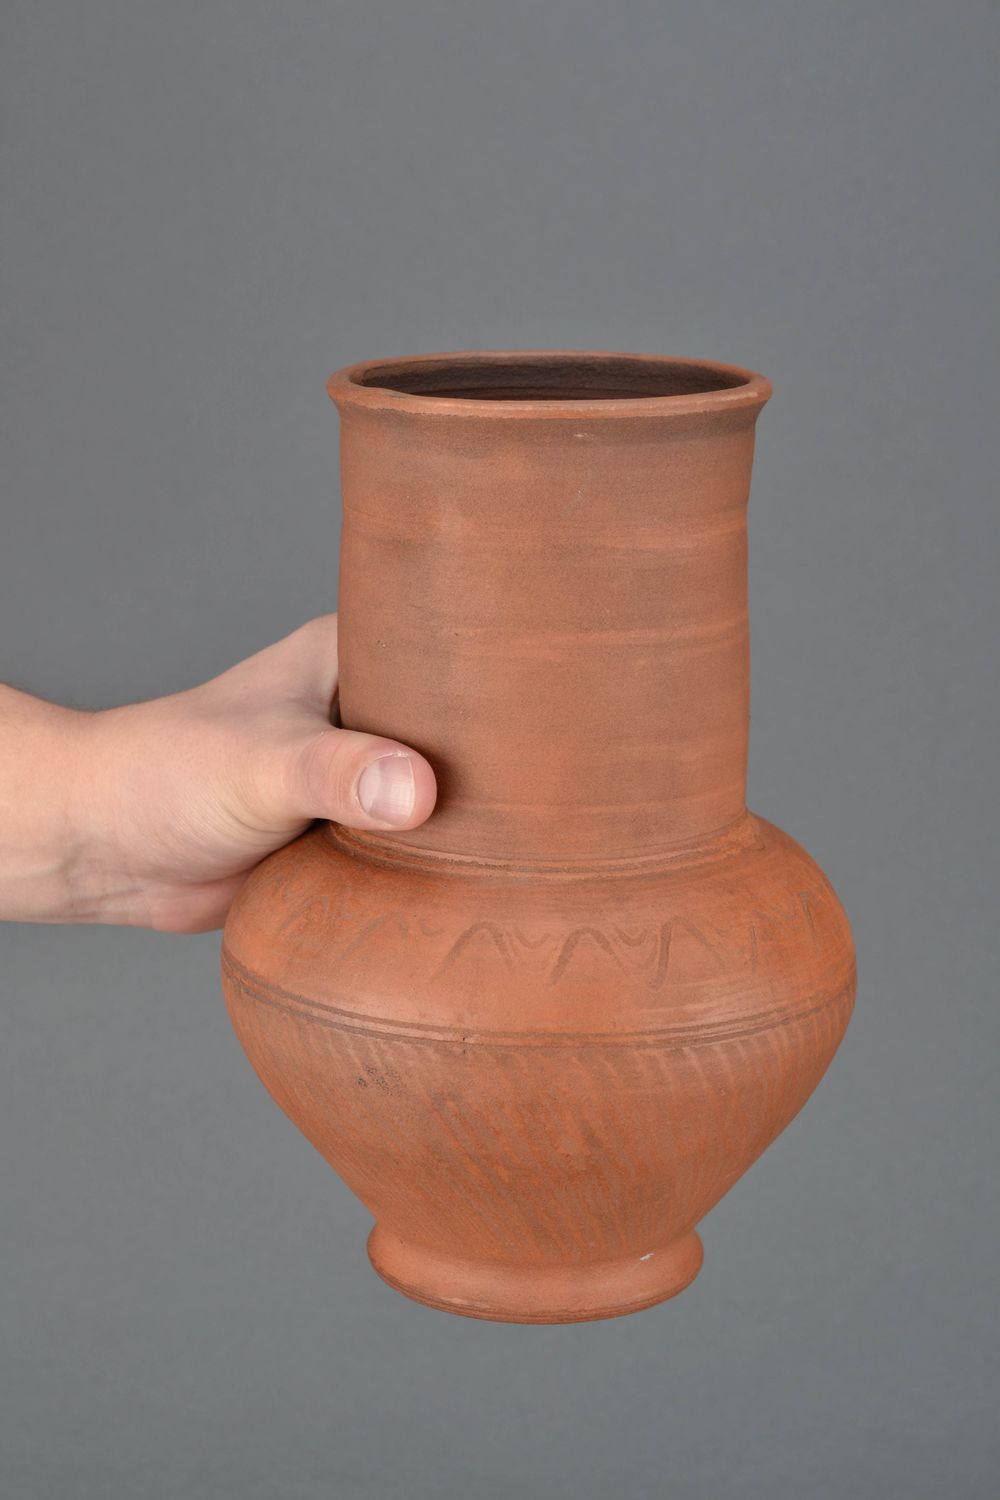 66 oz handmade ceramic terracotta water pitcher without handle 2 lb photo 2